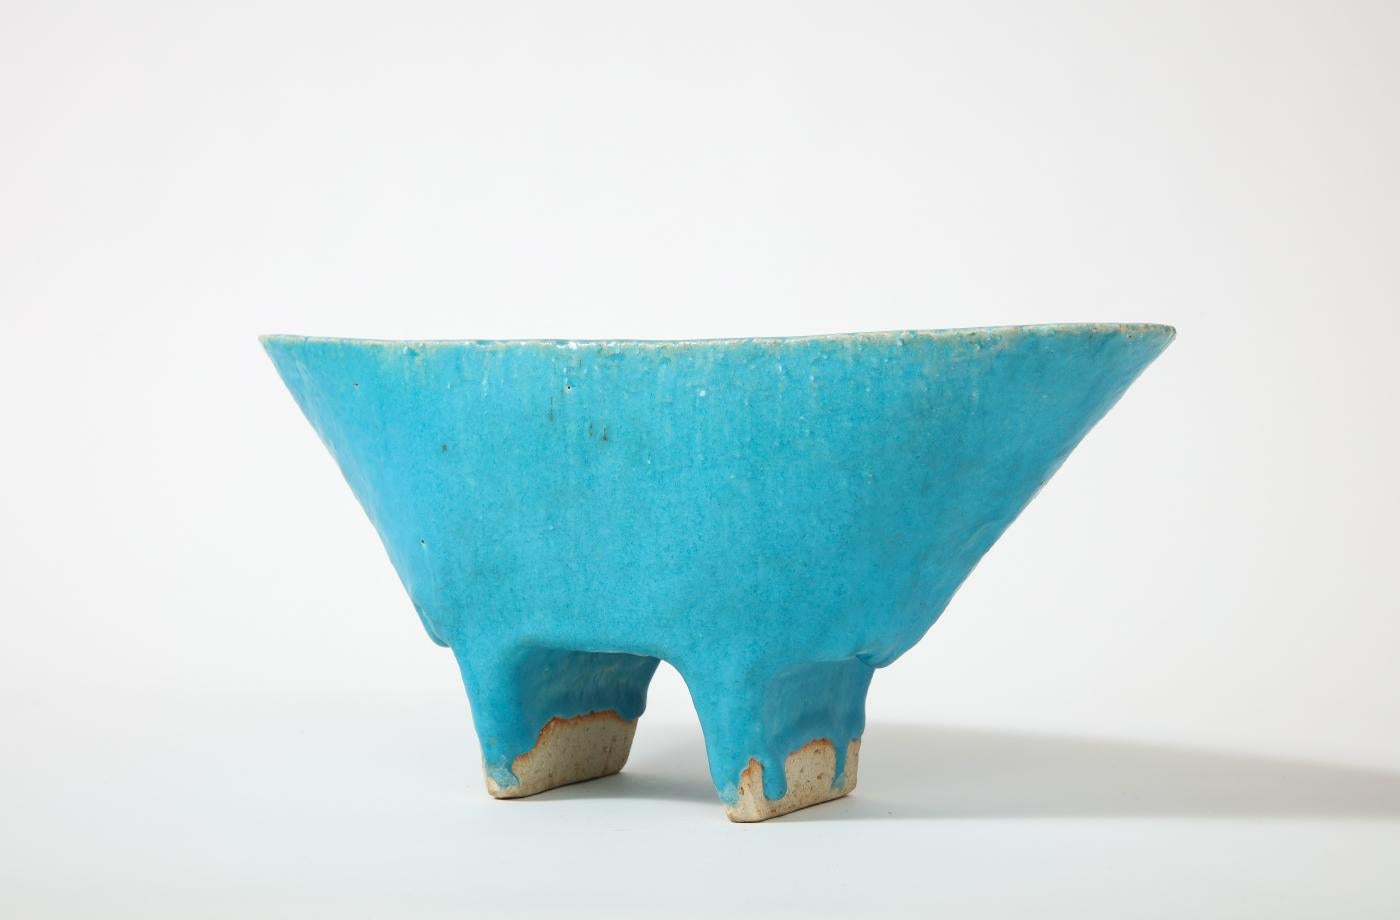 Glazed Ceramic Footed Vessel, 20th Century In Excellent Condition For Sale In New York City, NY